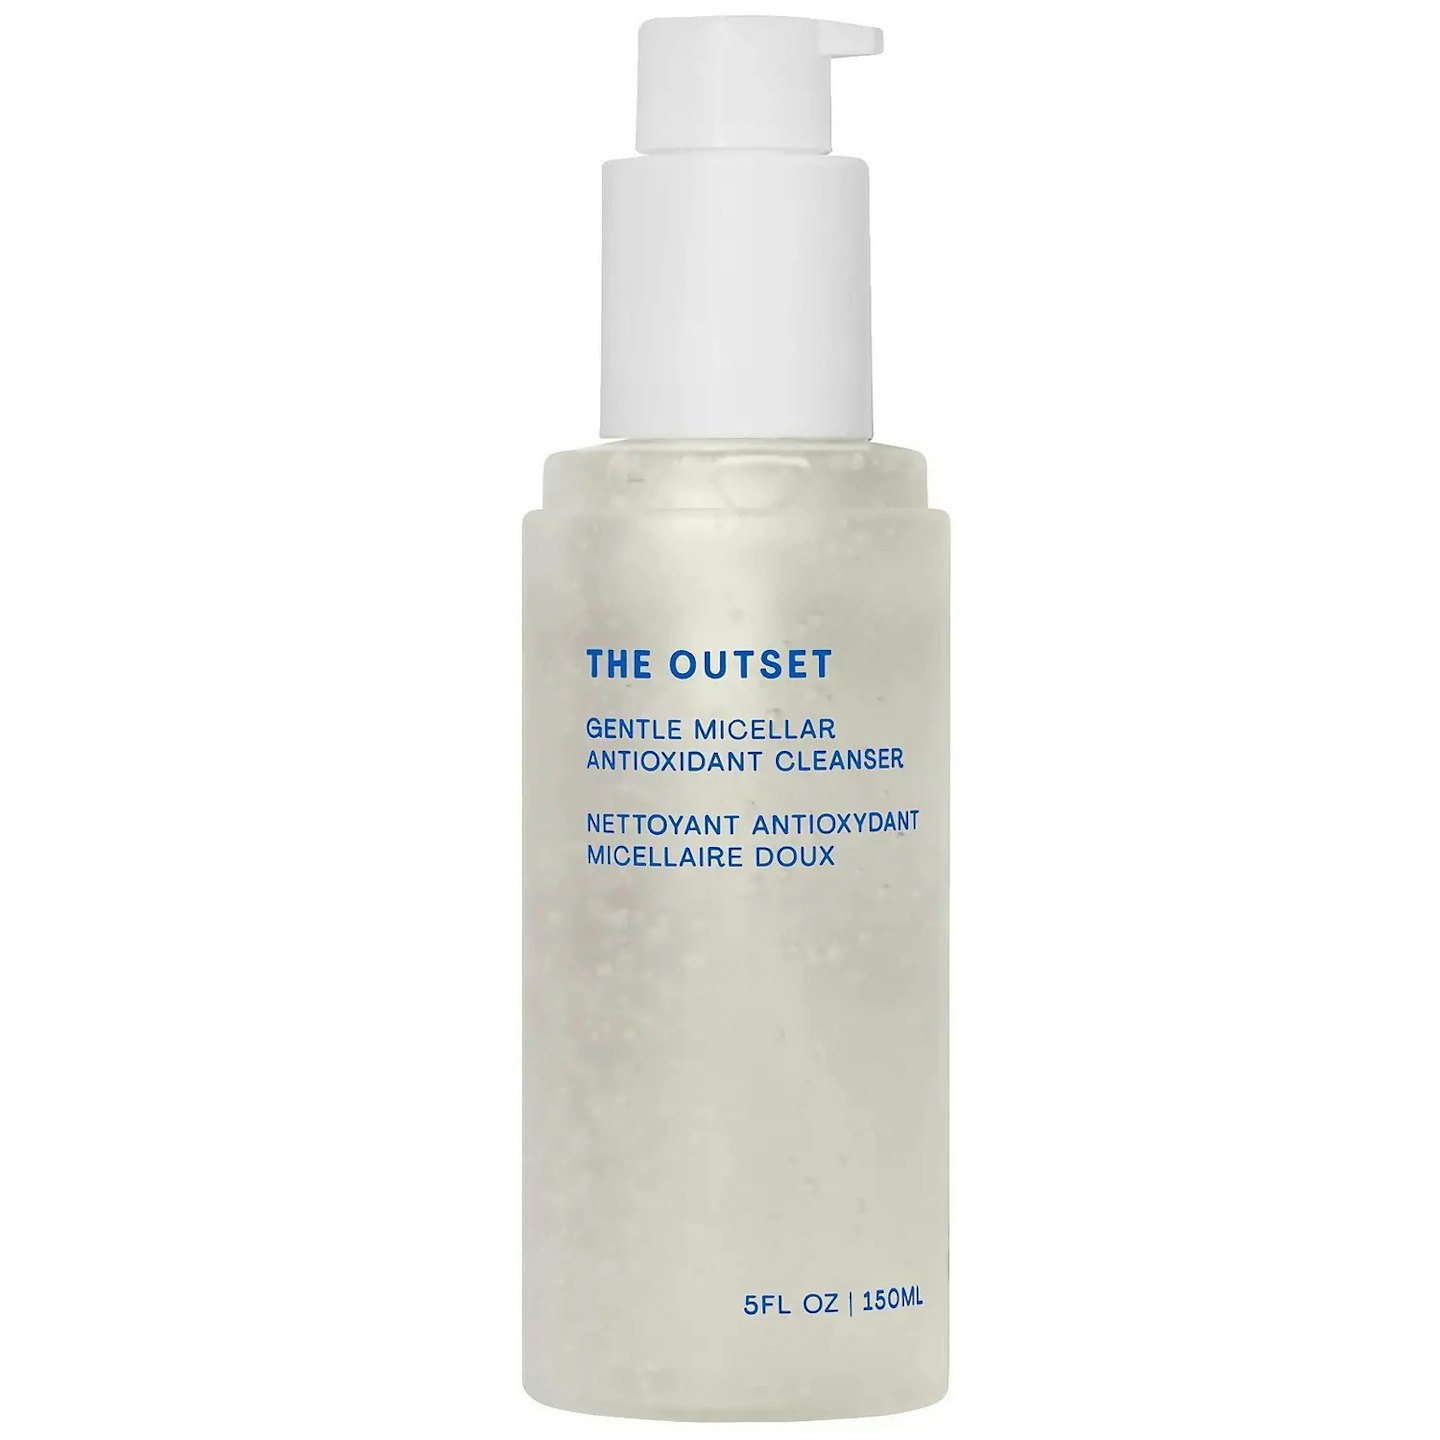 The Outset Gentle Micellar Anti-Oxidant Cleanser